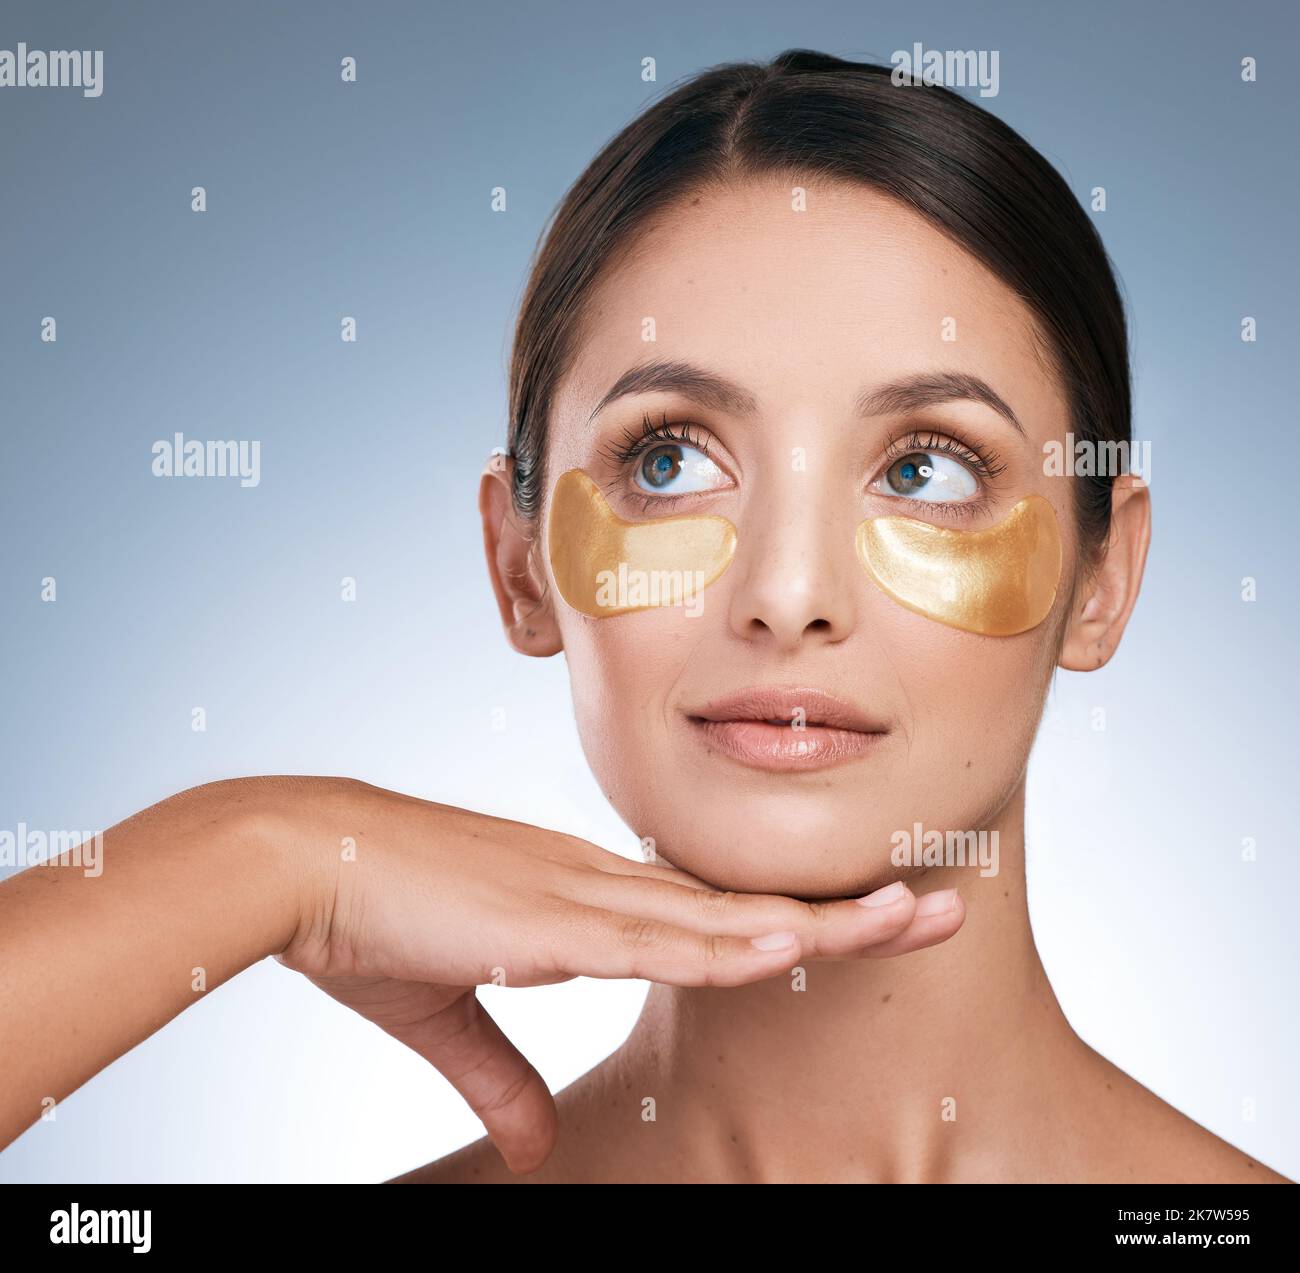 Before things come together, they have to fall apart. a young attractive woman wearing an under eye patch against a blue background. Stock Photo